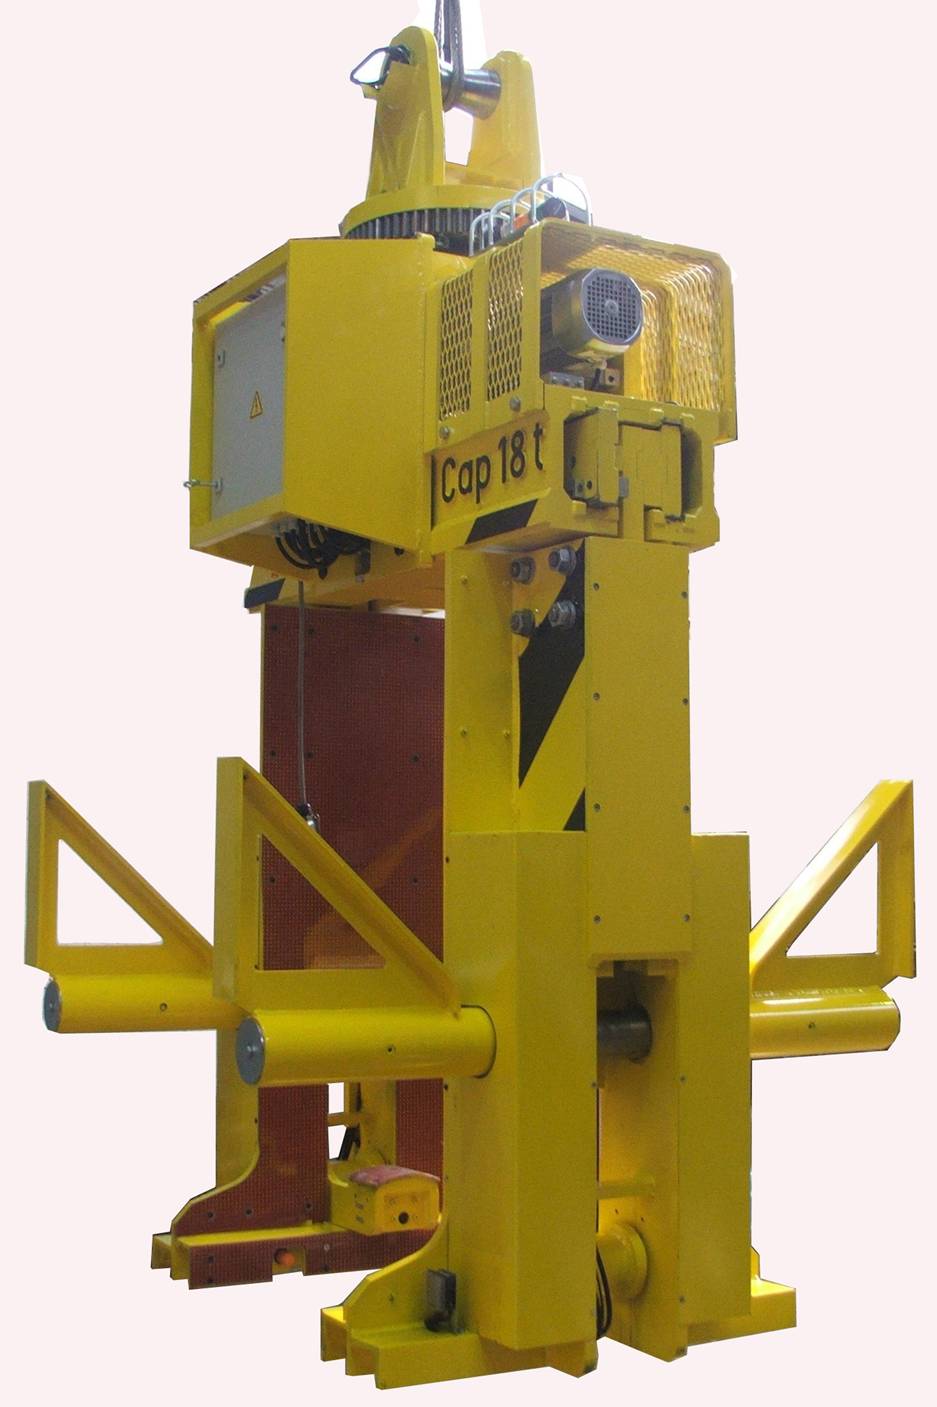 Tong for handling Coils in horizontal position or vertical Coils on palettes with Safety Device to prevent sliding of Vertical Coils from the palette